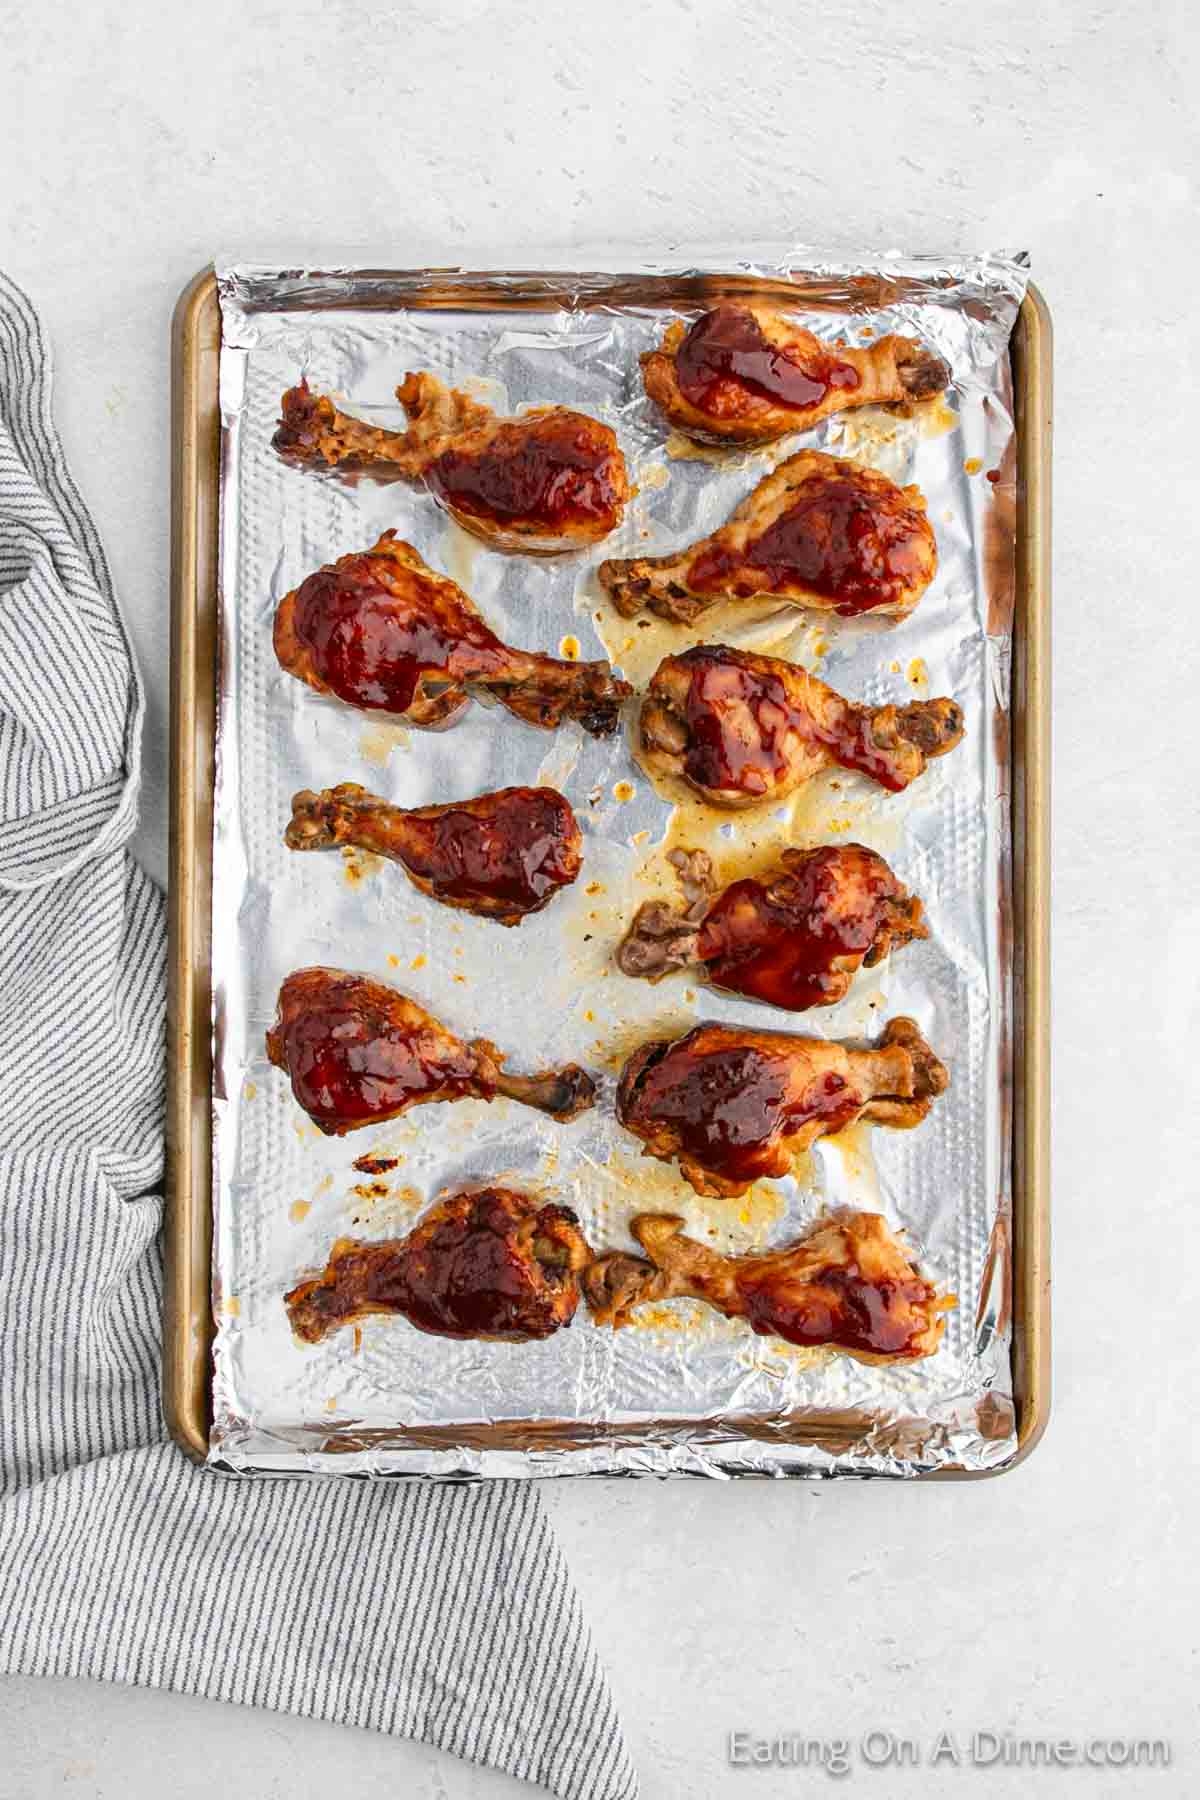 A baking sheet lined with aluminum foil is filled with 12 Crock Pot BBQ Ranch drumsticks covered in barbecue sauce. The sheet is placed on a light-colored surface next to a striped cloth. The text "Eating On A Dime.com" is visible in the bottom right corner.